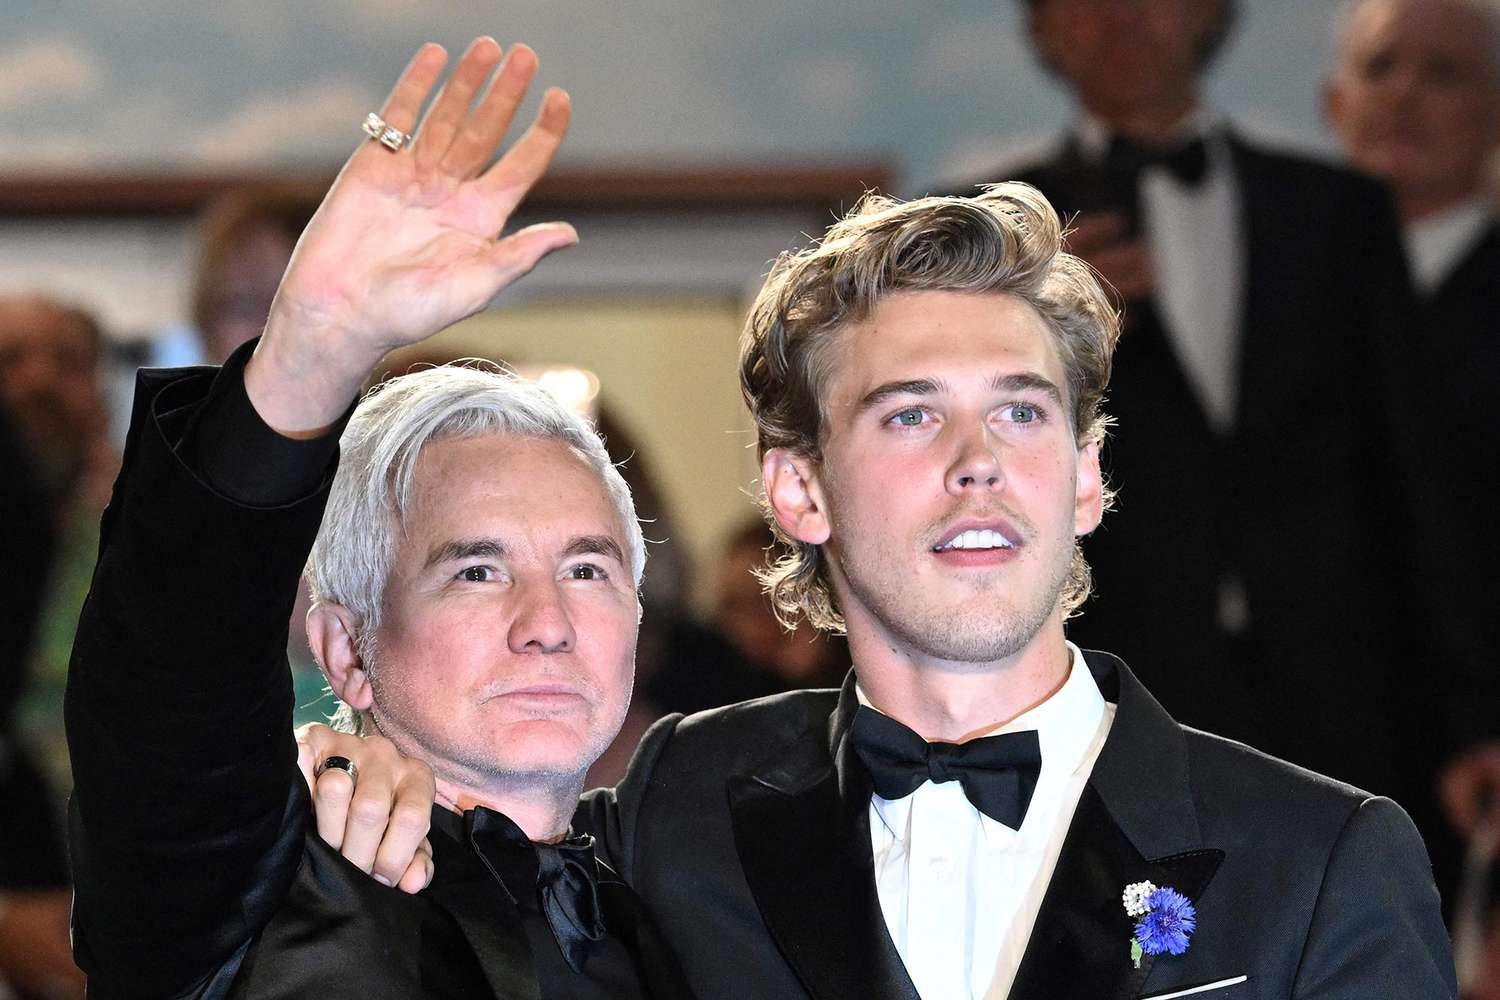 Baz Luhrmann (L) and US actor Austin Butler pose as they leave the Festival Palace following the screening of the film "Elvis" during the 75th edition of the Cannes Film Festival in Cannes, southern France, on May 25, 2022.